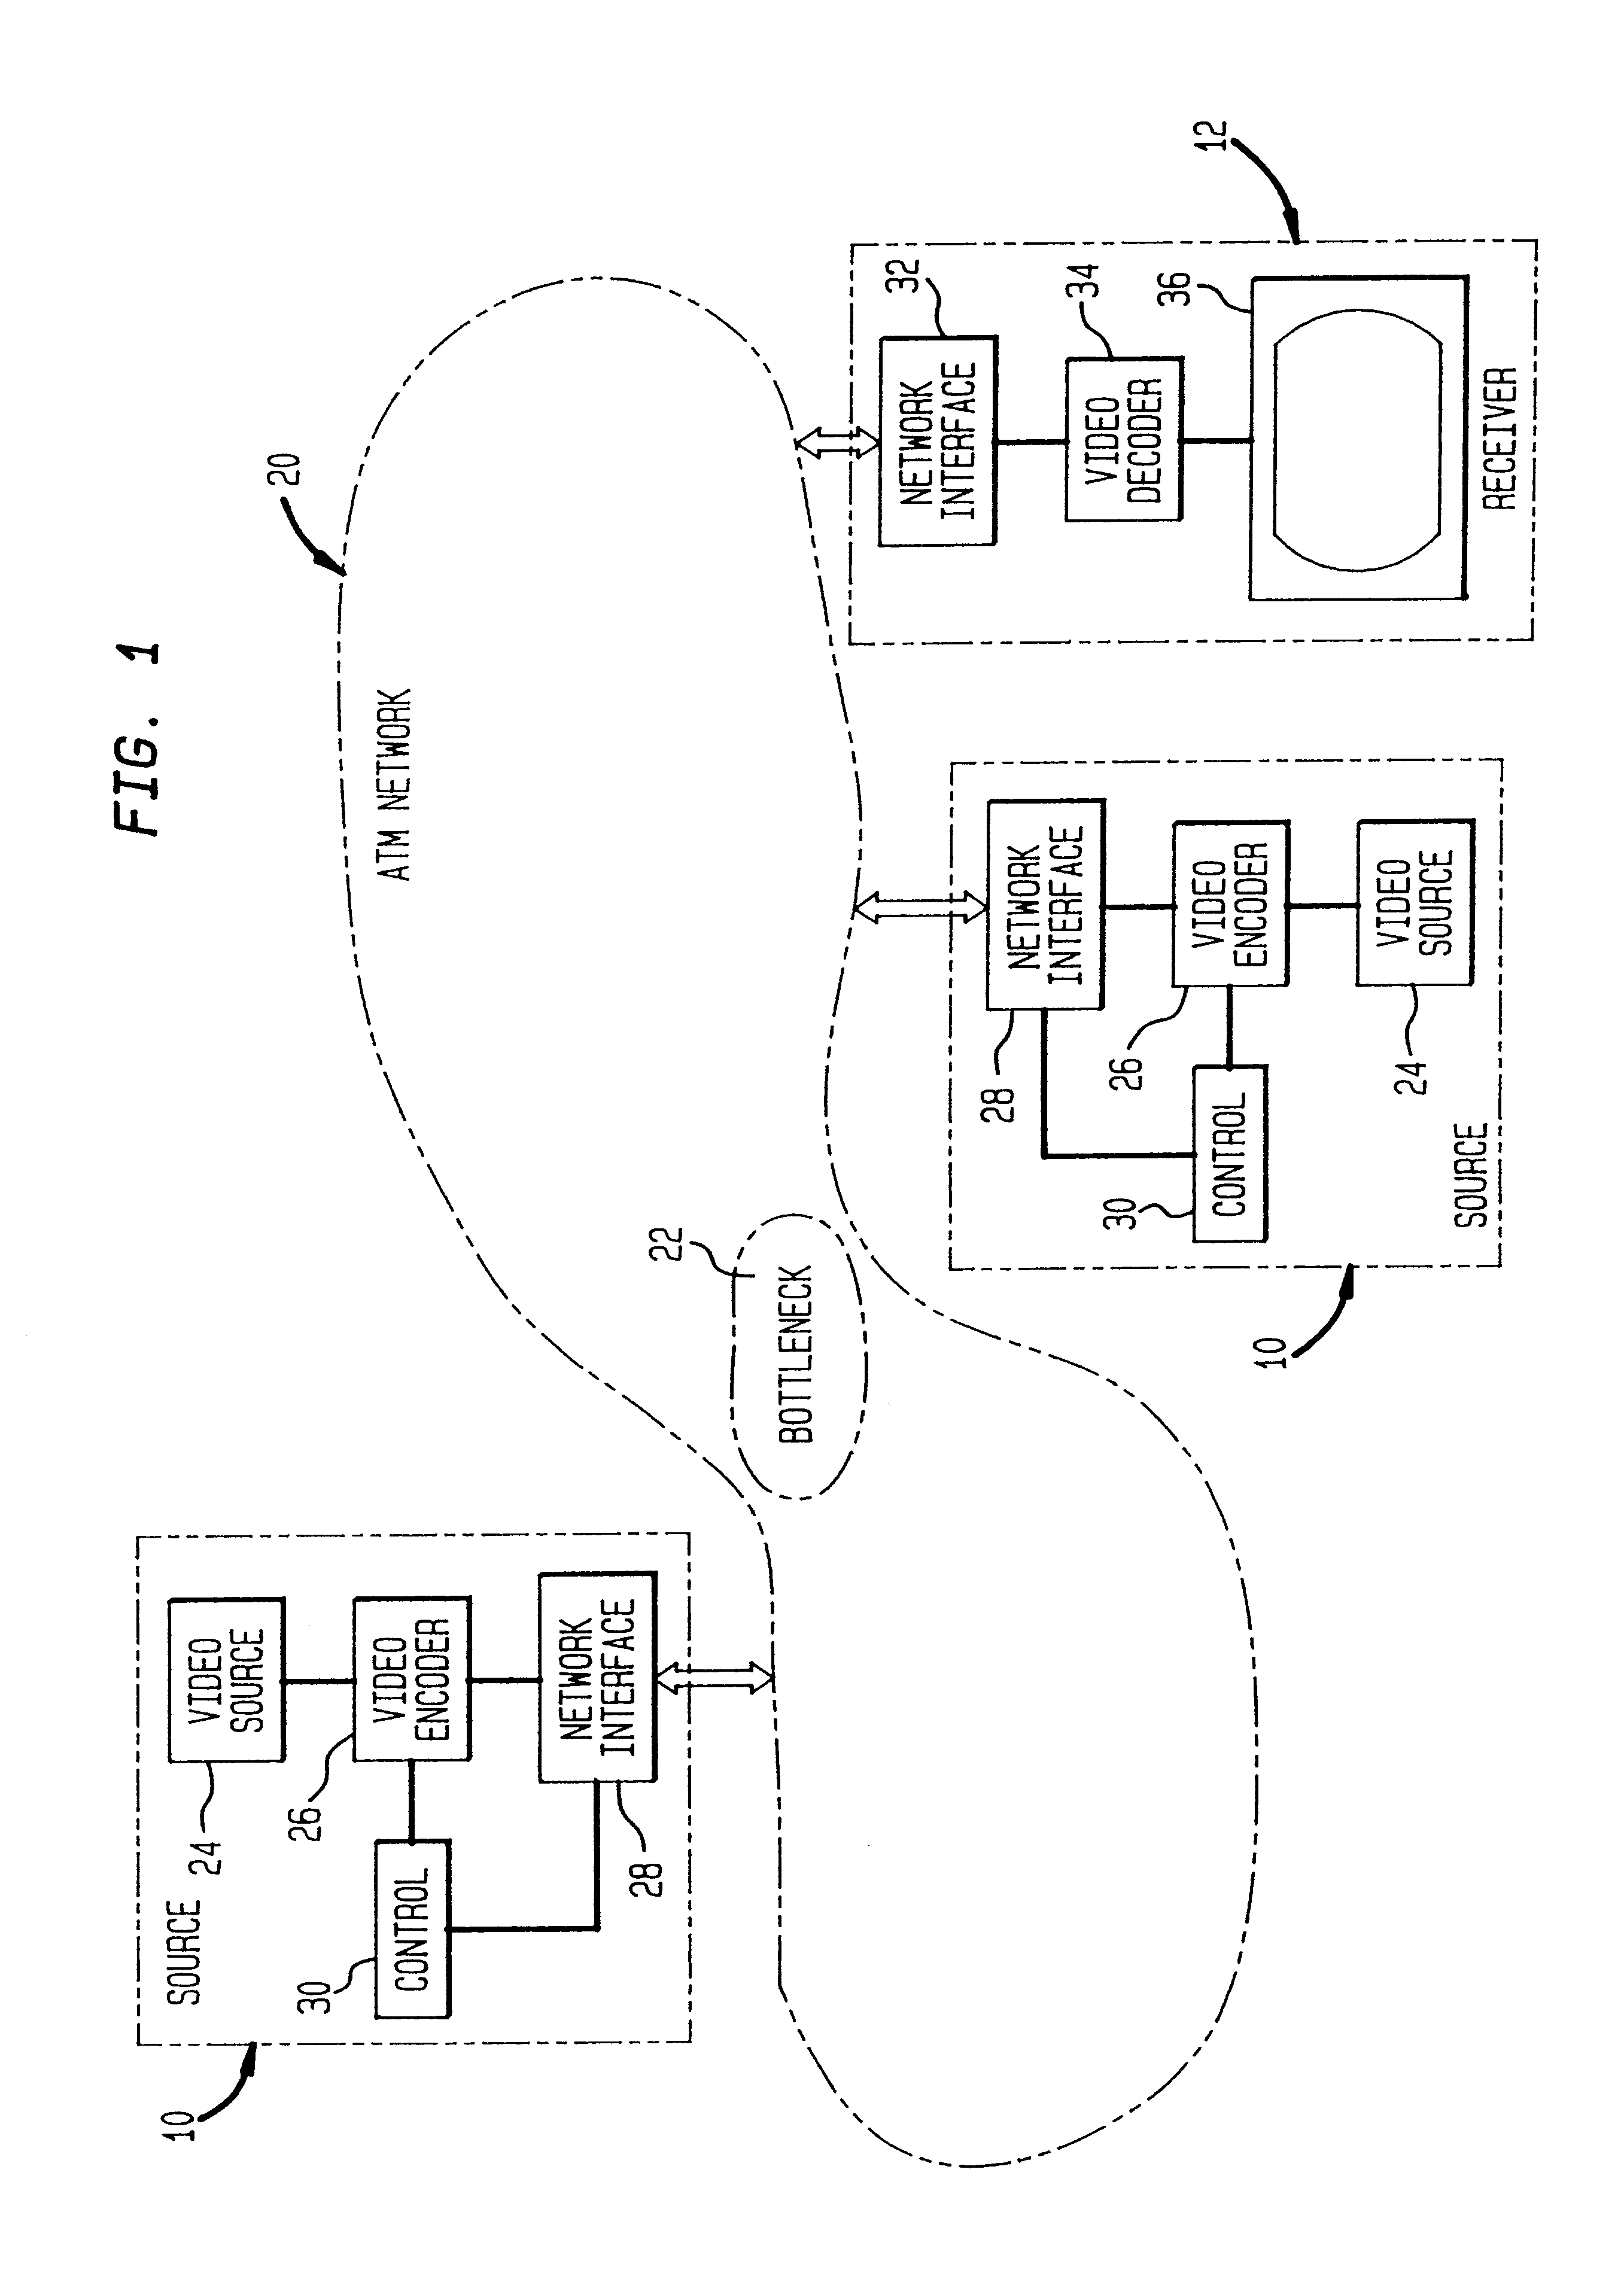 Fair bandwidth sharing for video traffic sources using distributed feedback control